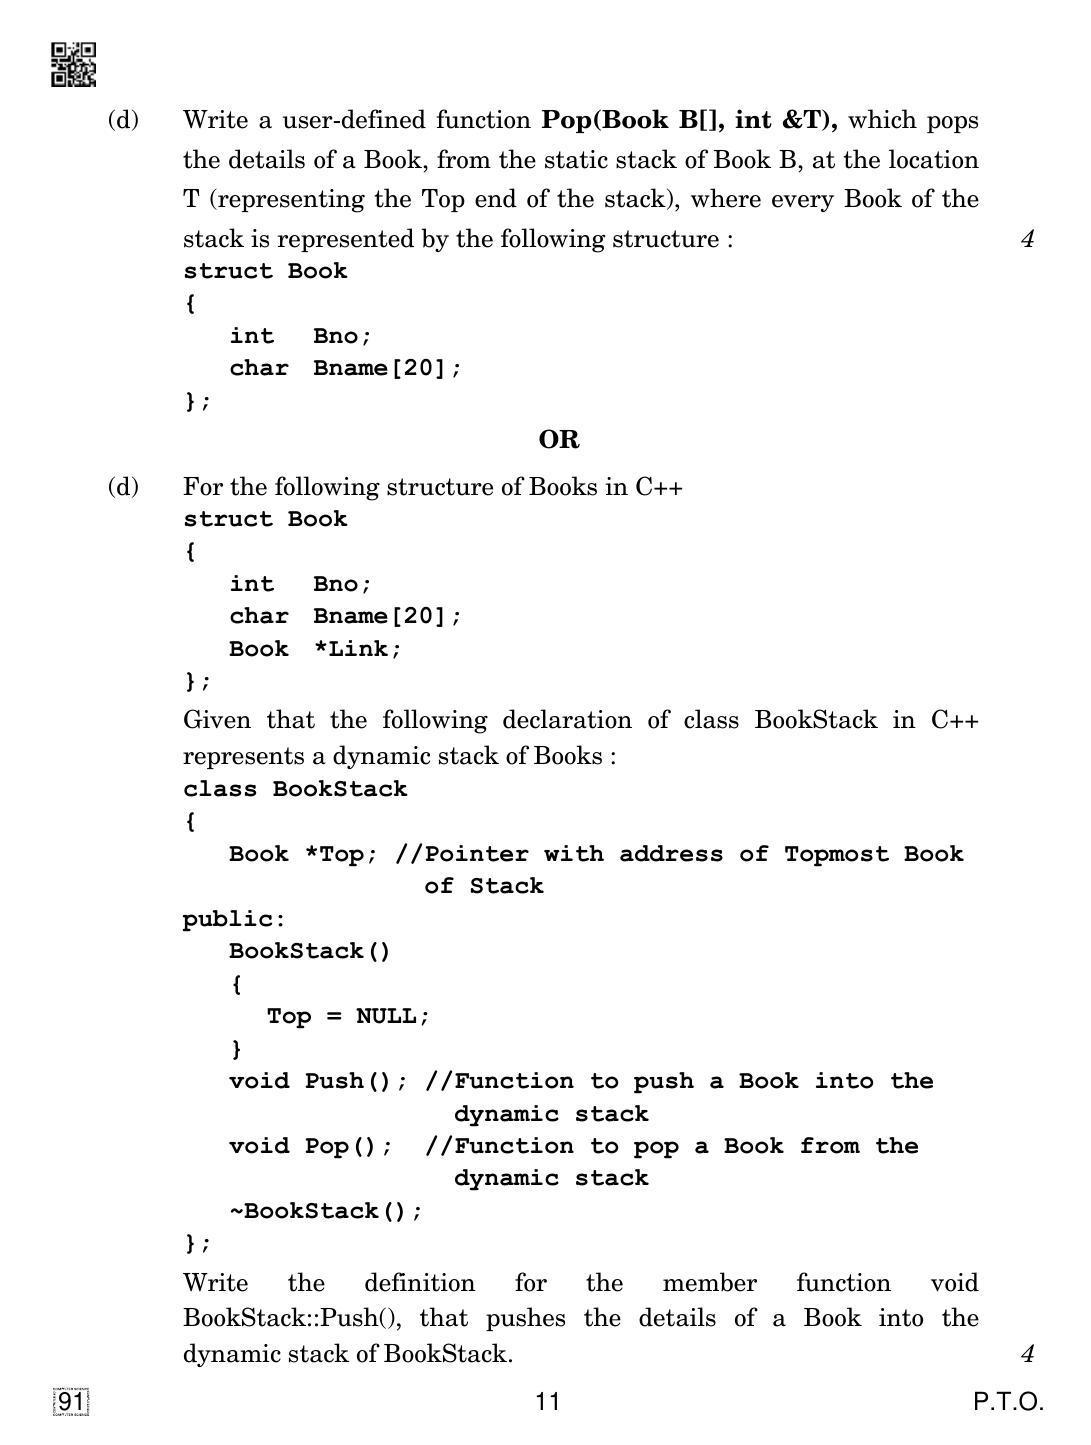 CBSE Class 12 91 Computer Science 2019 Question Paper - Page 11